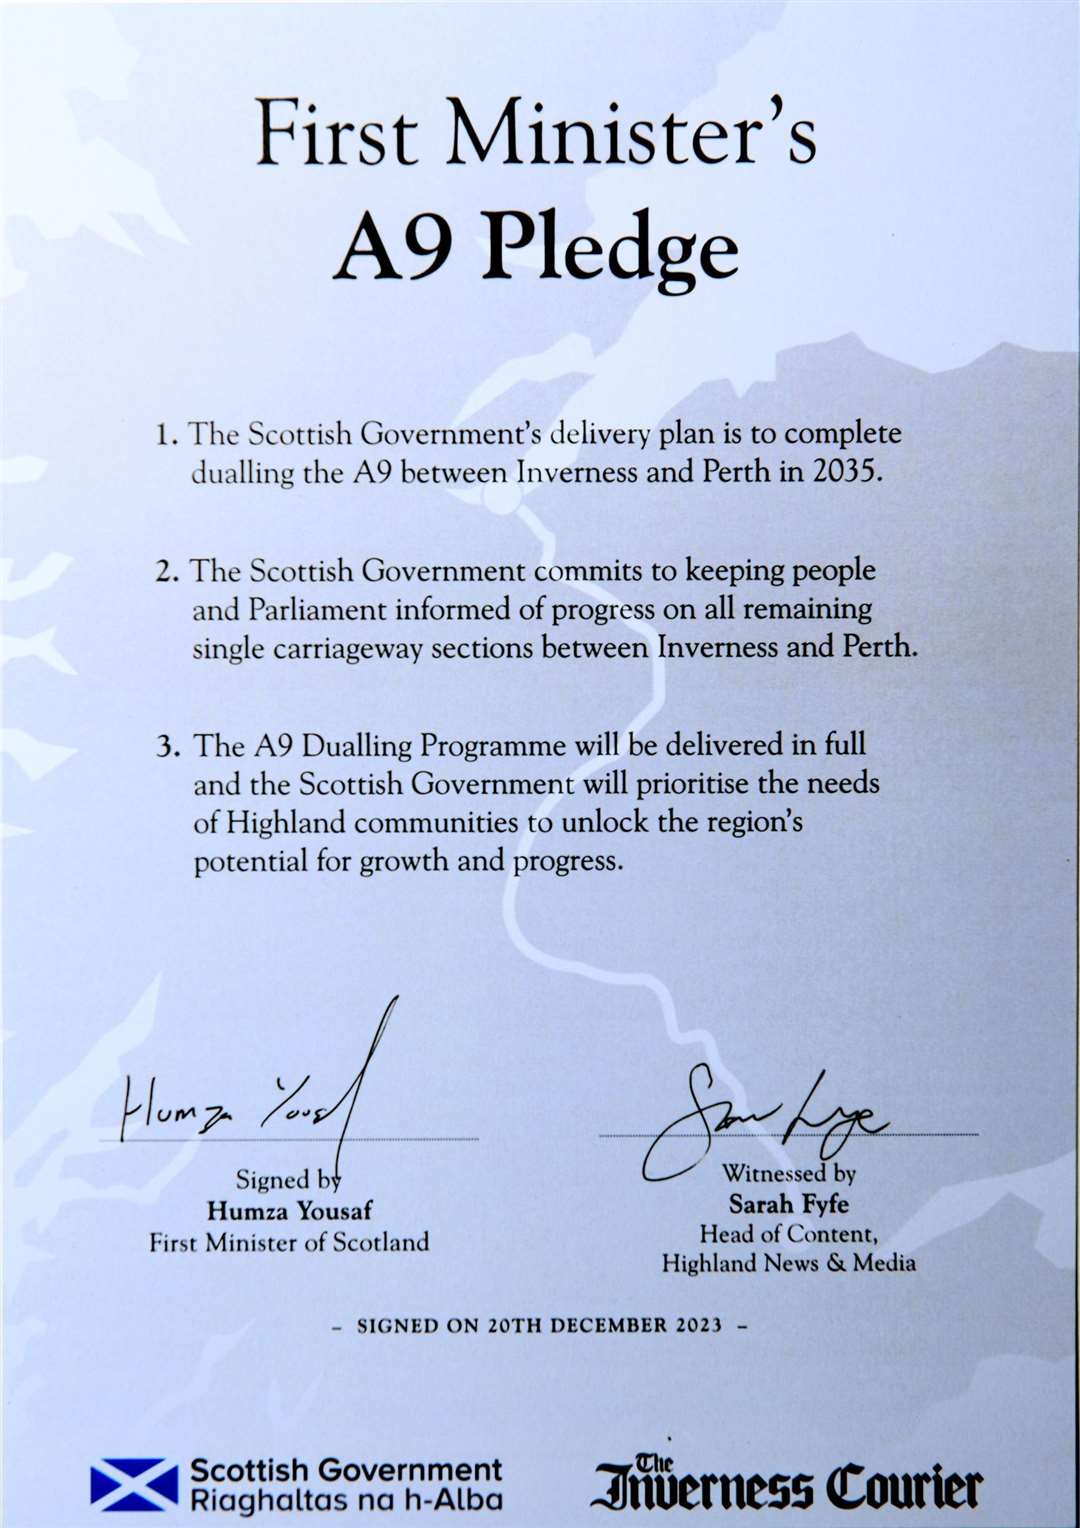 The First Minister's A9 Pledge.